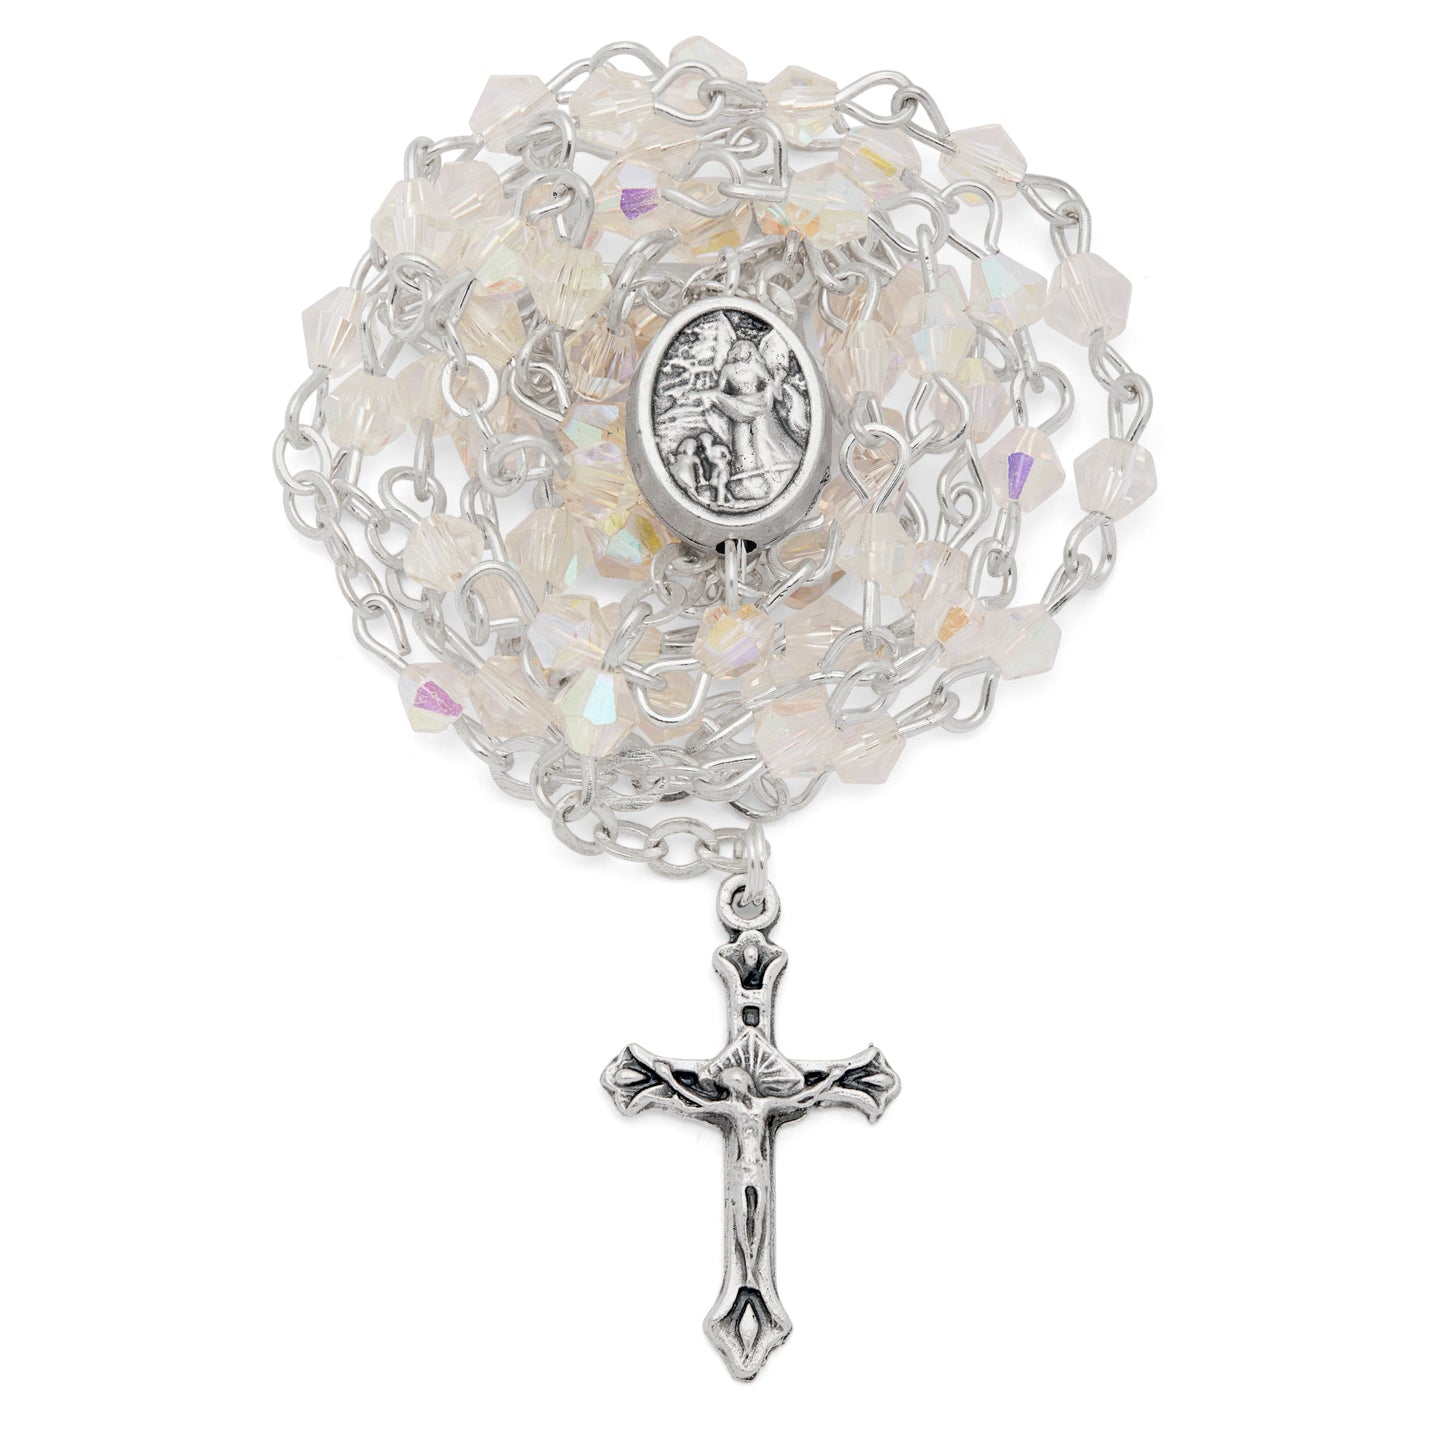 Mondo Cattolico Rosary Box 3.5x4 cm (1.38x1.57 in) / 3 mm (0.12 in) / 37.5 cm (14.76 in) Small White Enameled Guardian Angel Rosary Case With White Crystal Rosary